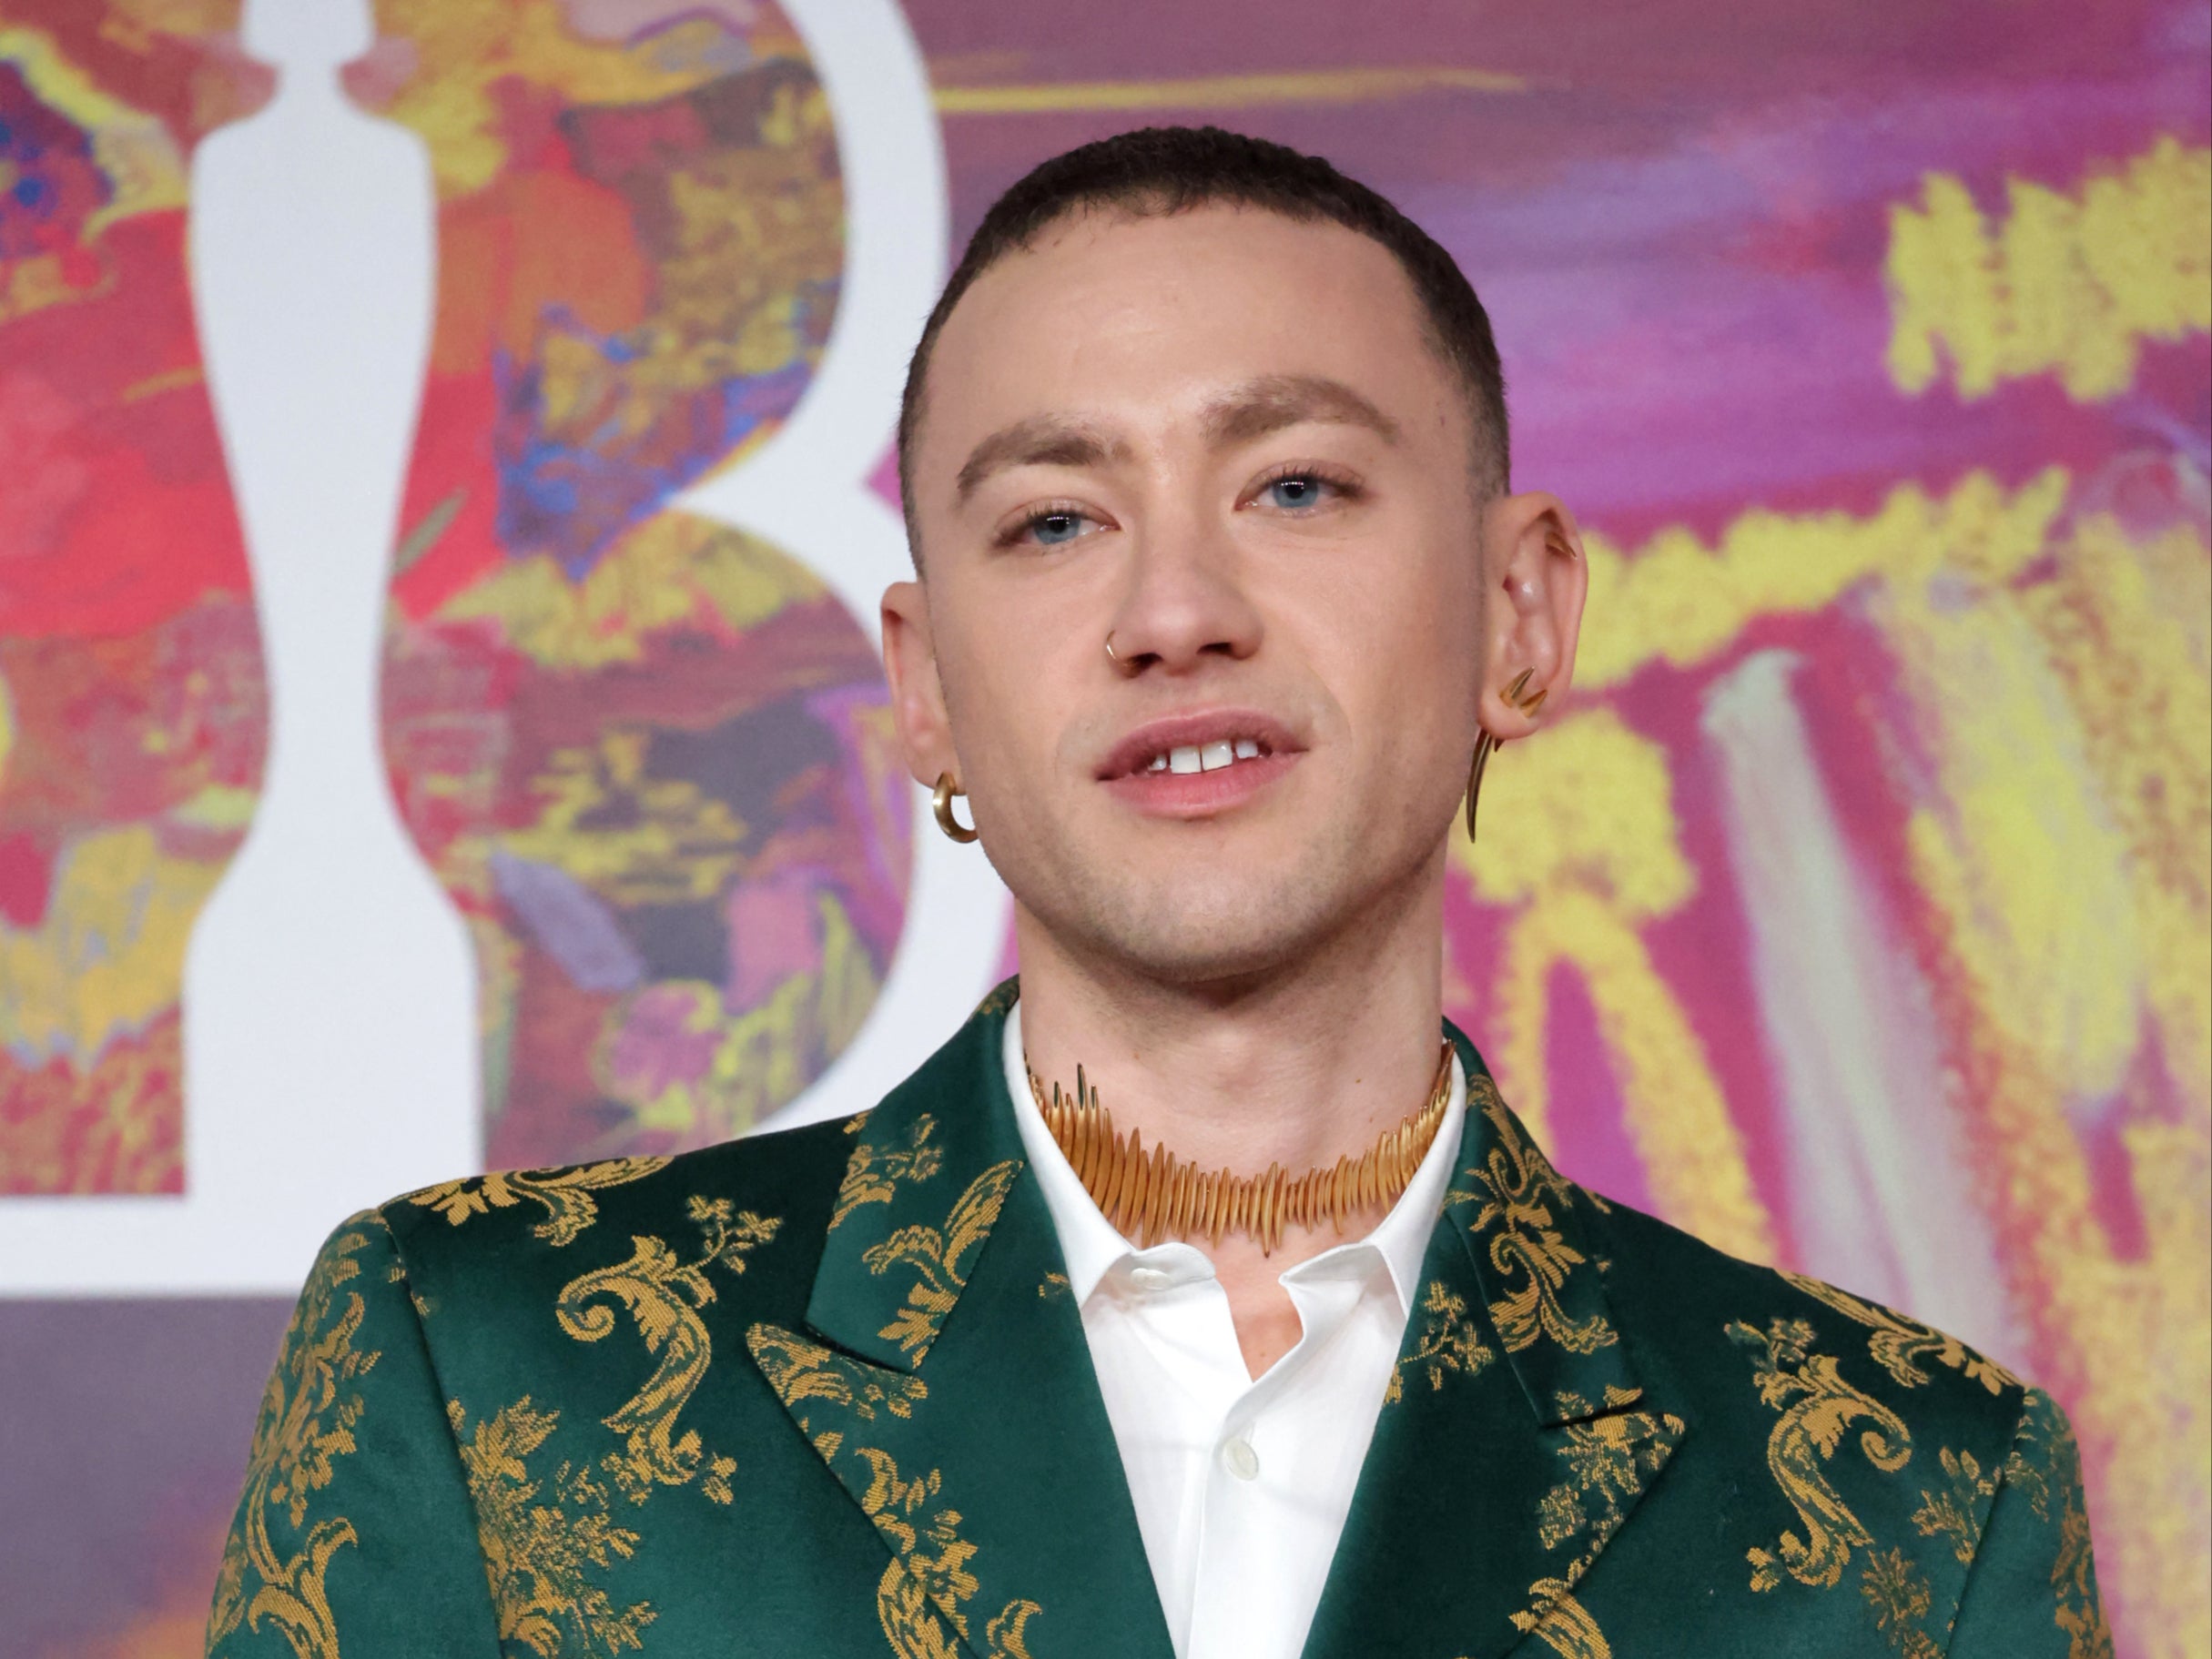 Olly Alexander has previously signed a letter calling the country an ‘apartheid regime’